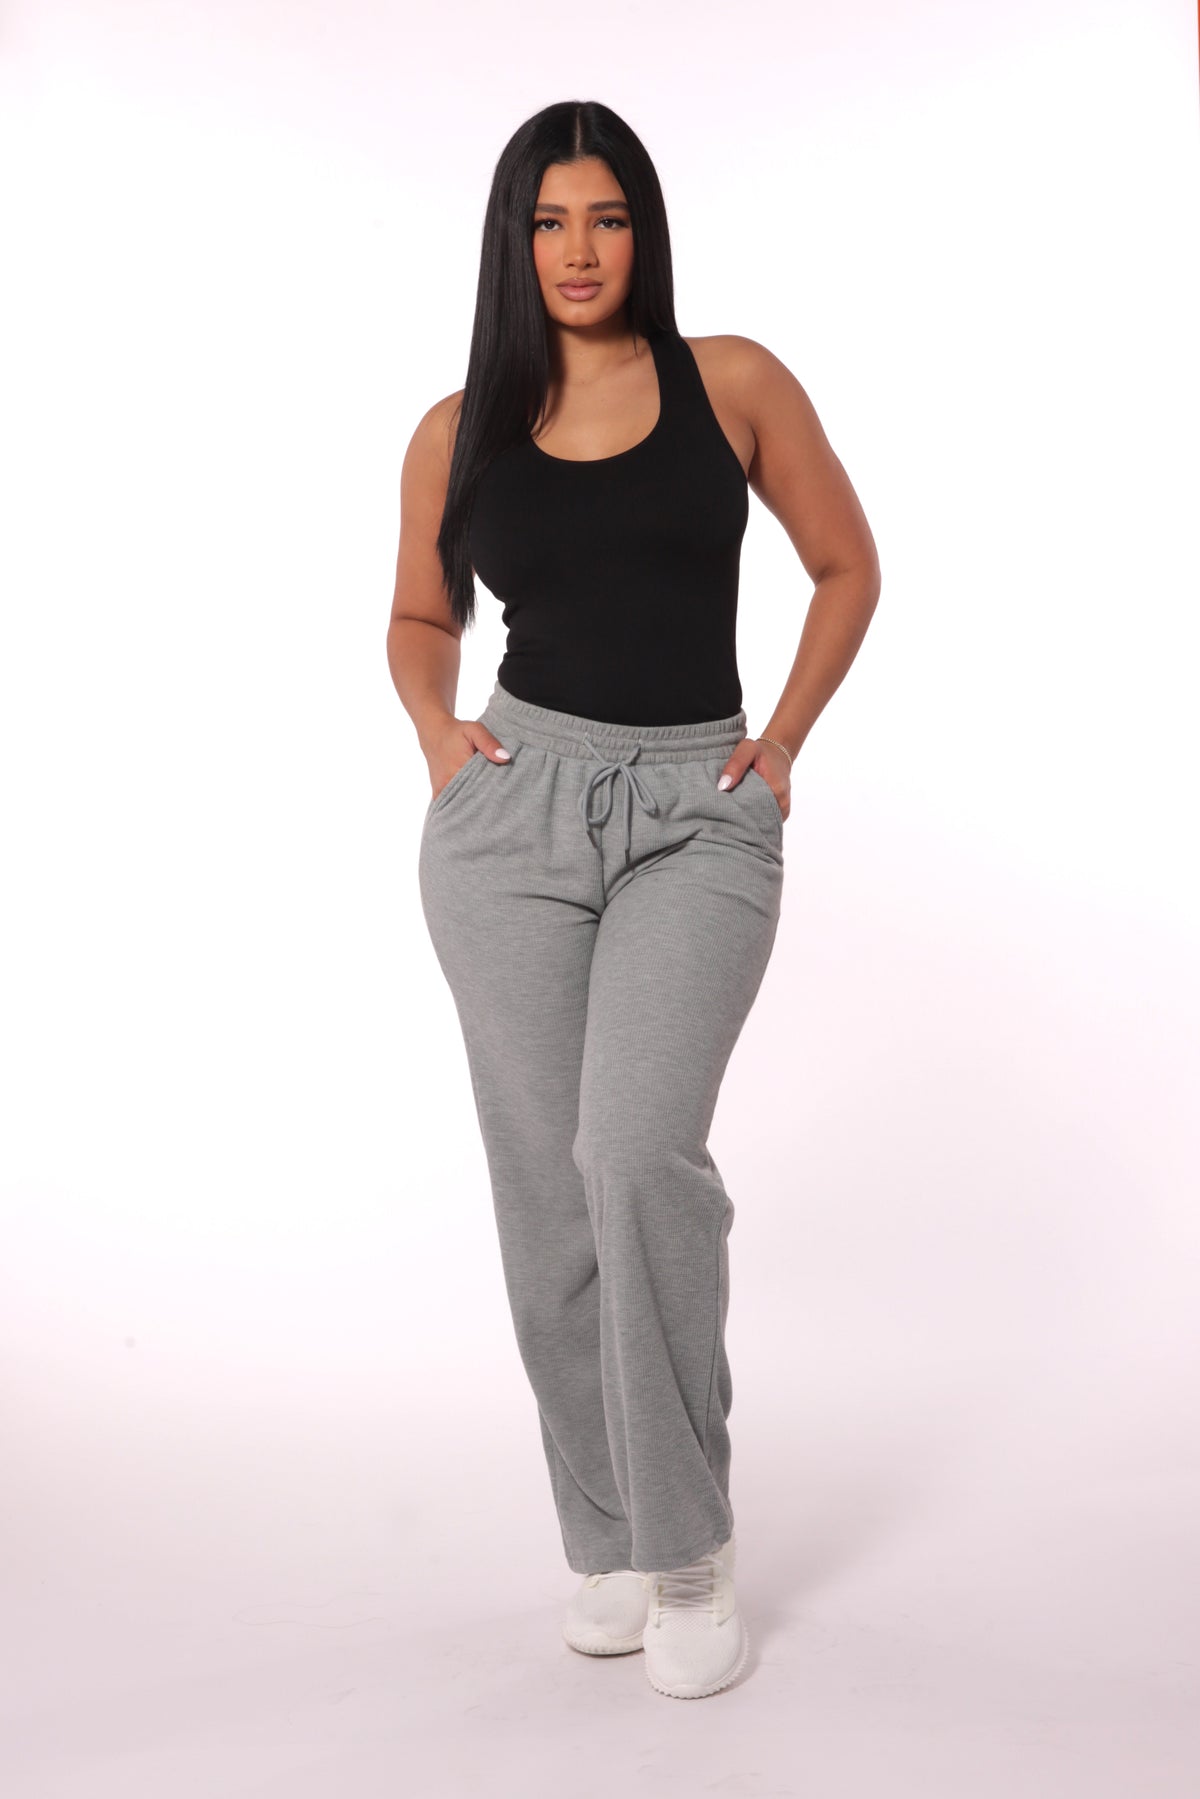 Fleece-Lined Cropped Ankle-Tied Pants for Women, Casual Sweatpants, Small  Pants, XS, 50 Short Clothes - AliExpress